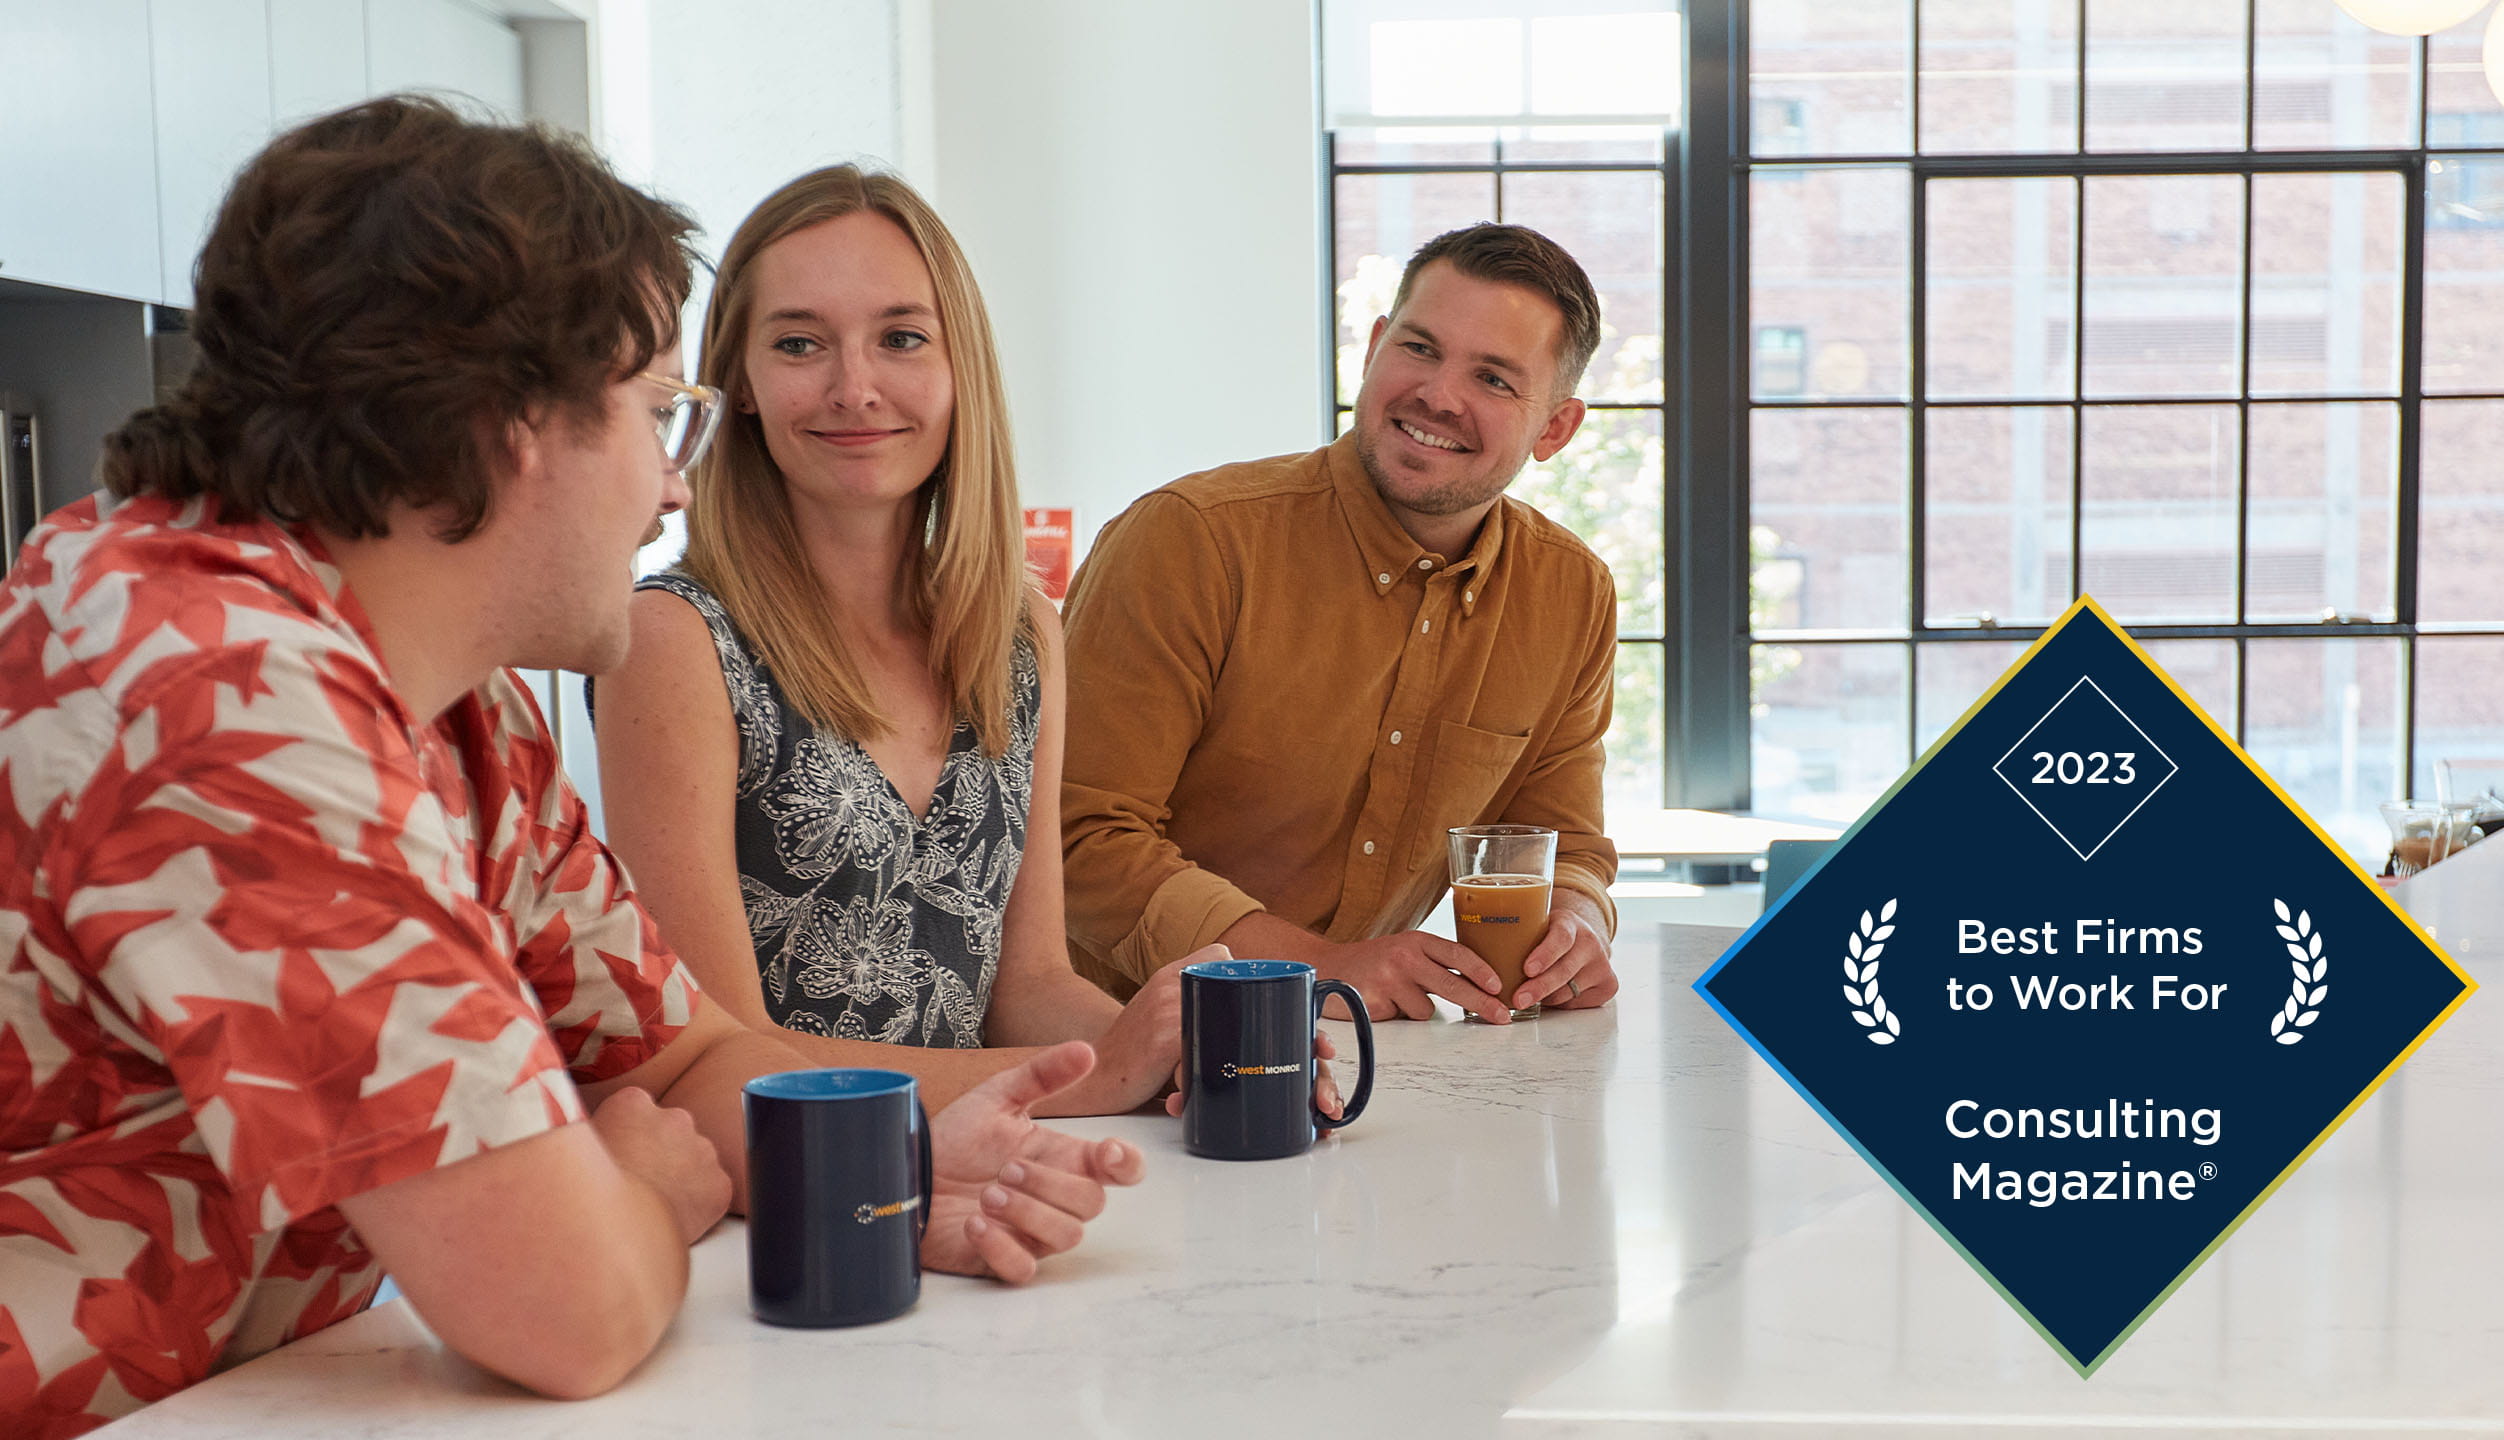 Coworkers drinking coffee together with award badge in corner